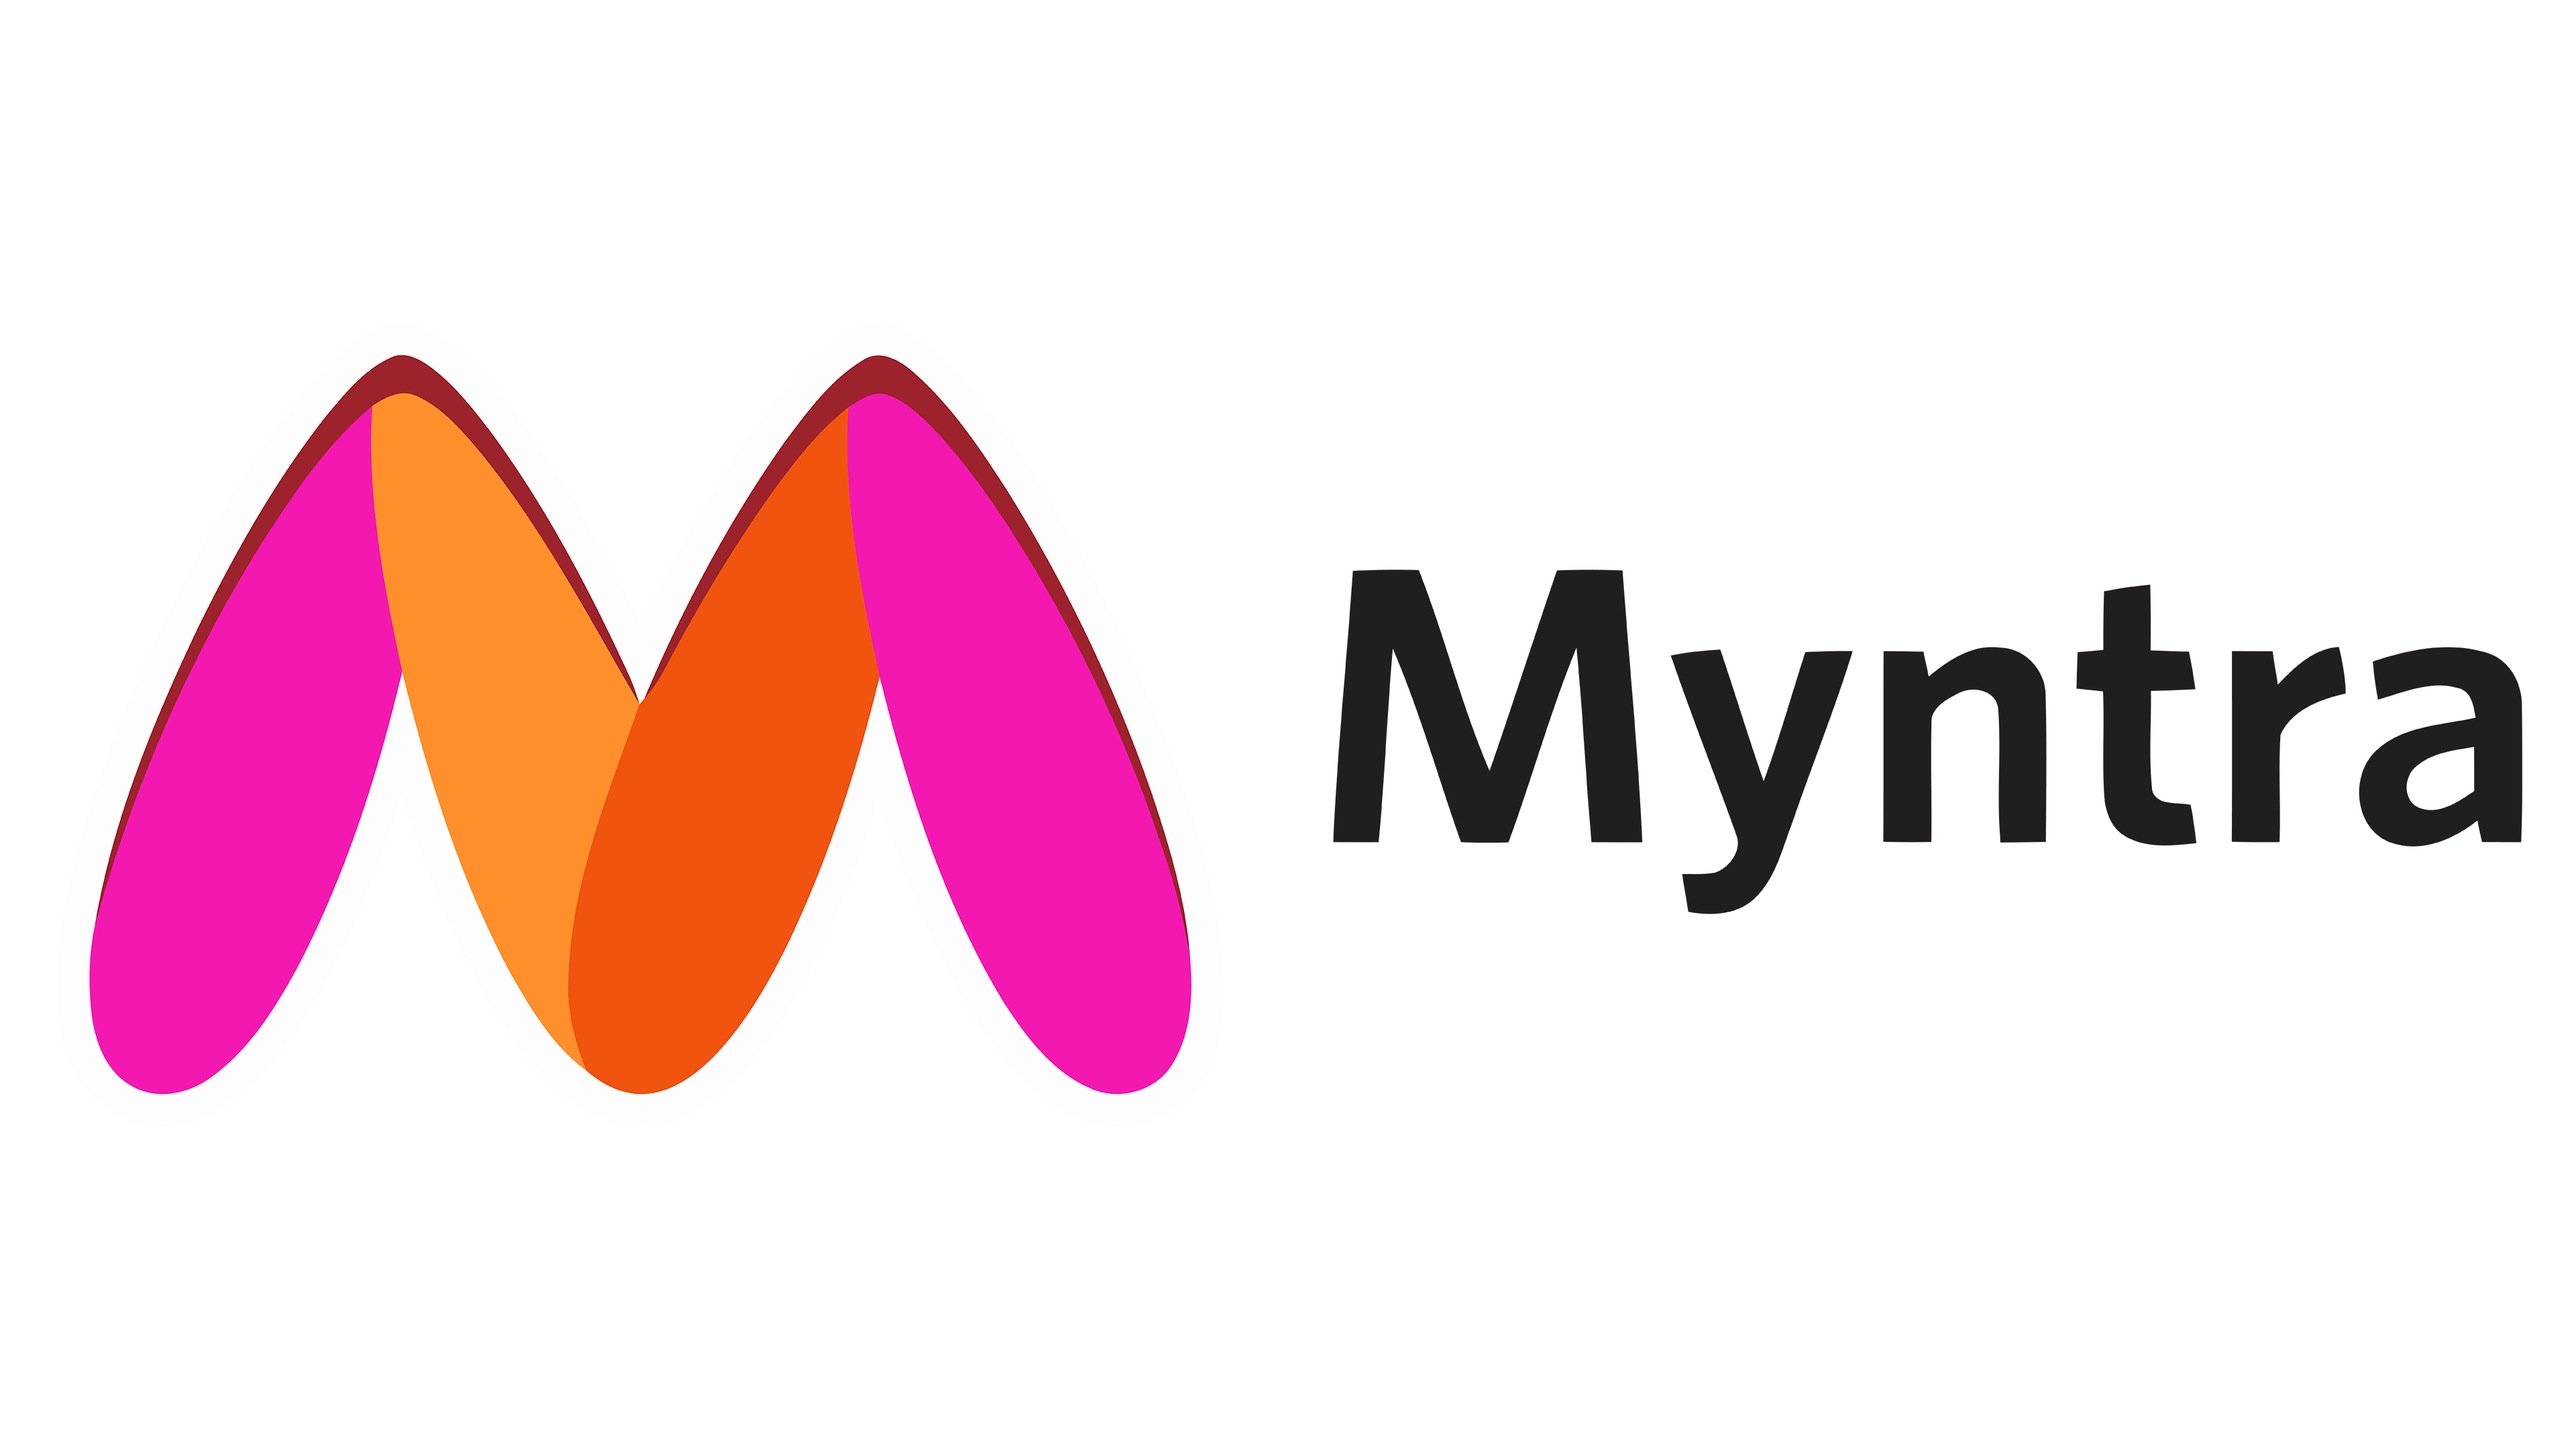 Myntra launches FWD for Gen Z customers, aims to tap 10 mn new customers by 2025.